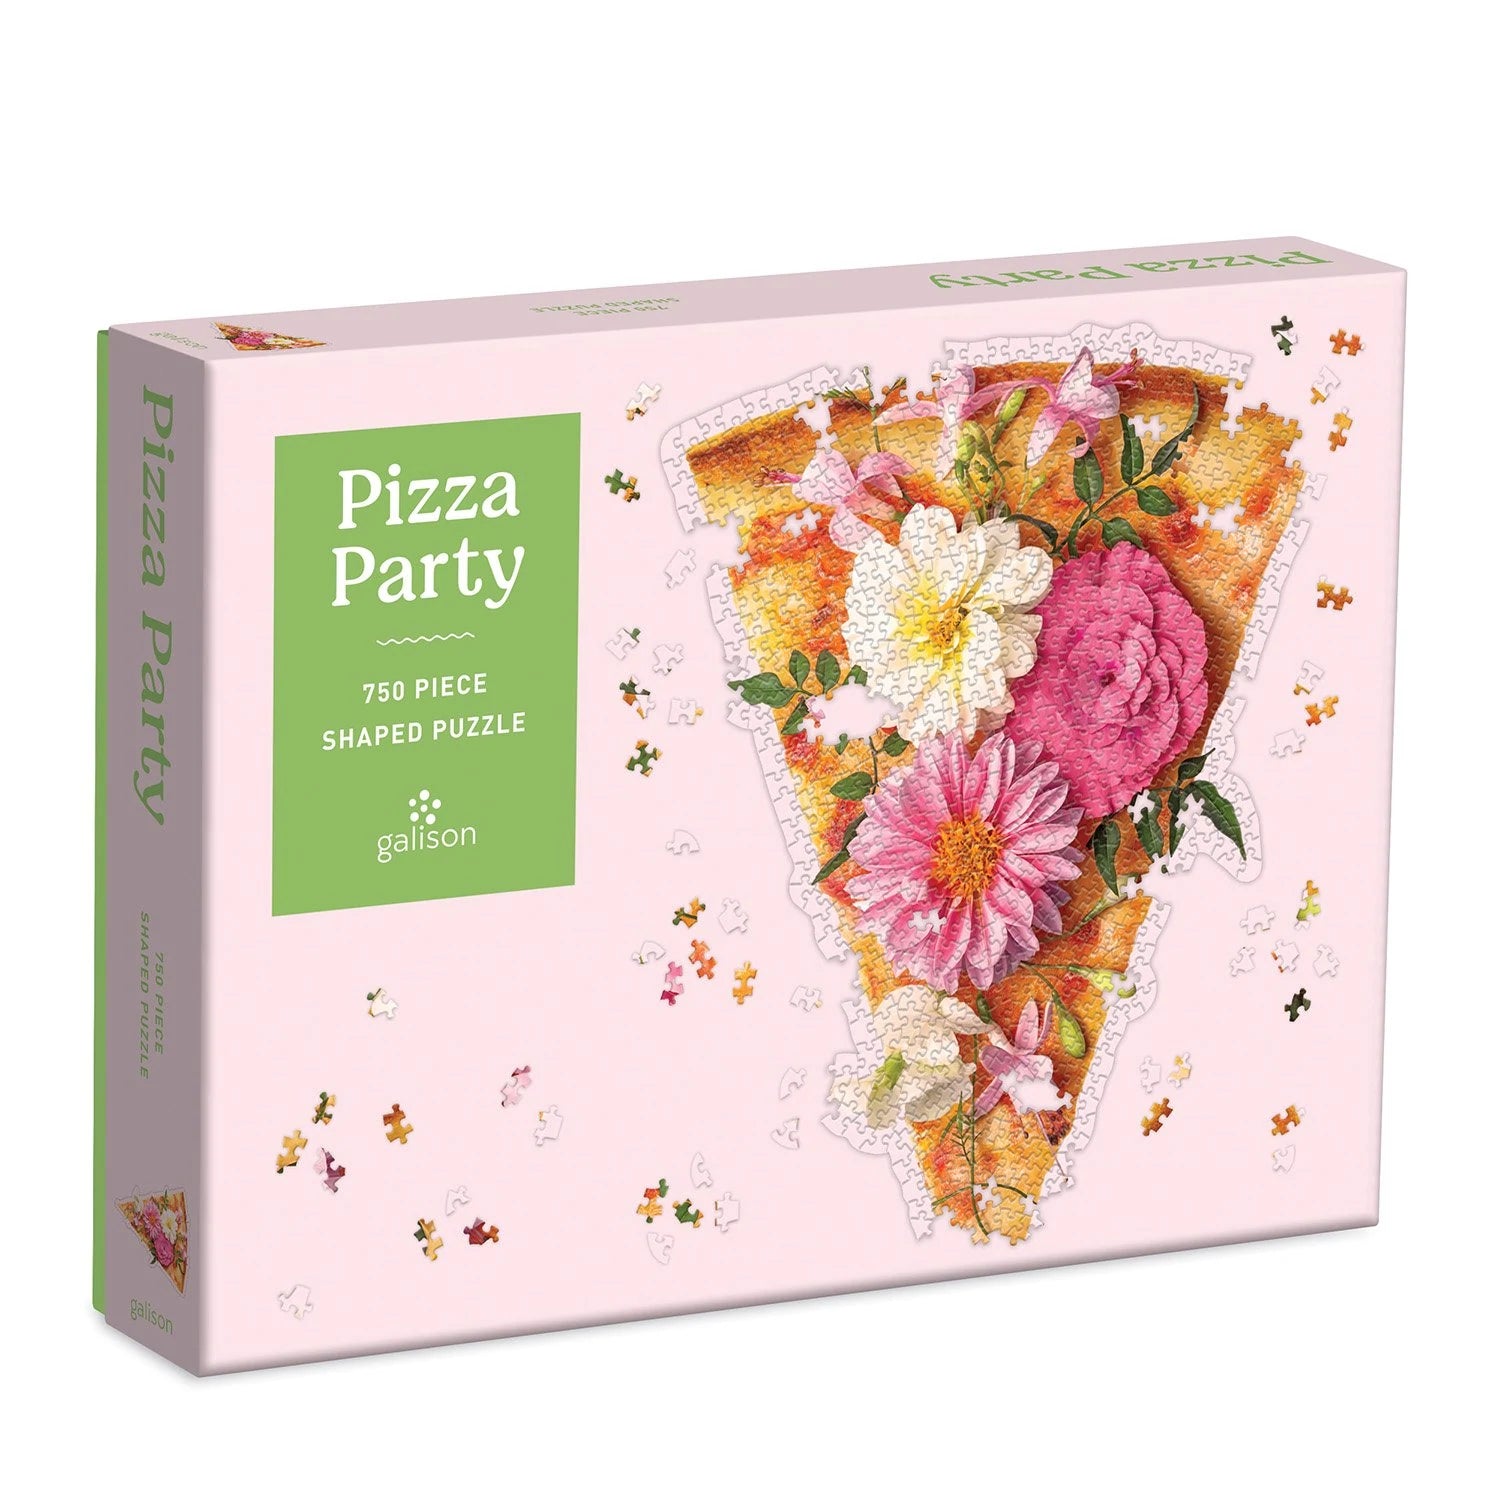 Galison | 750pc Shaped Puzzle - Pizza Party